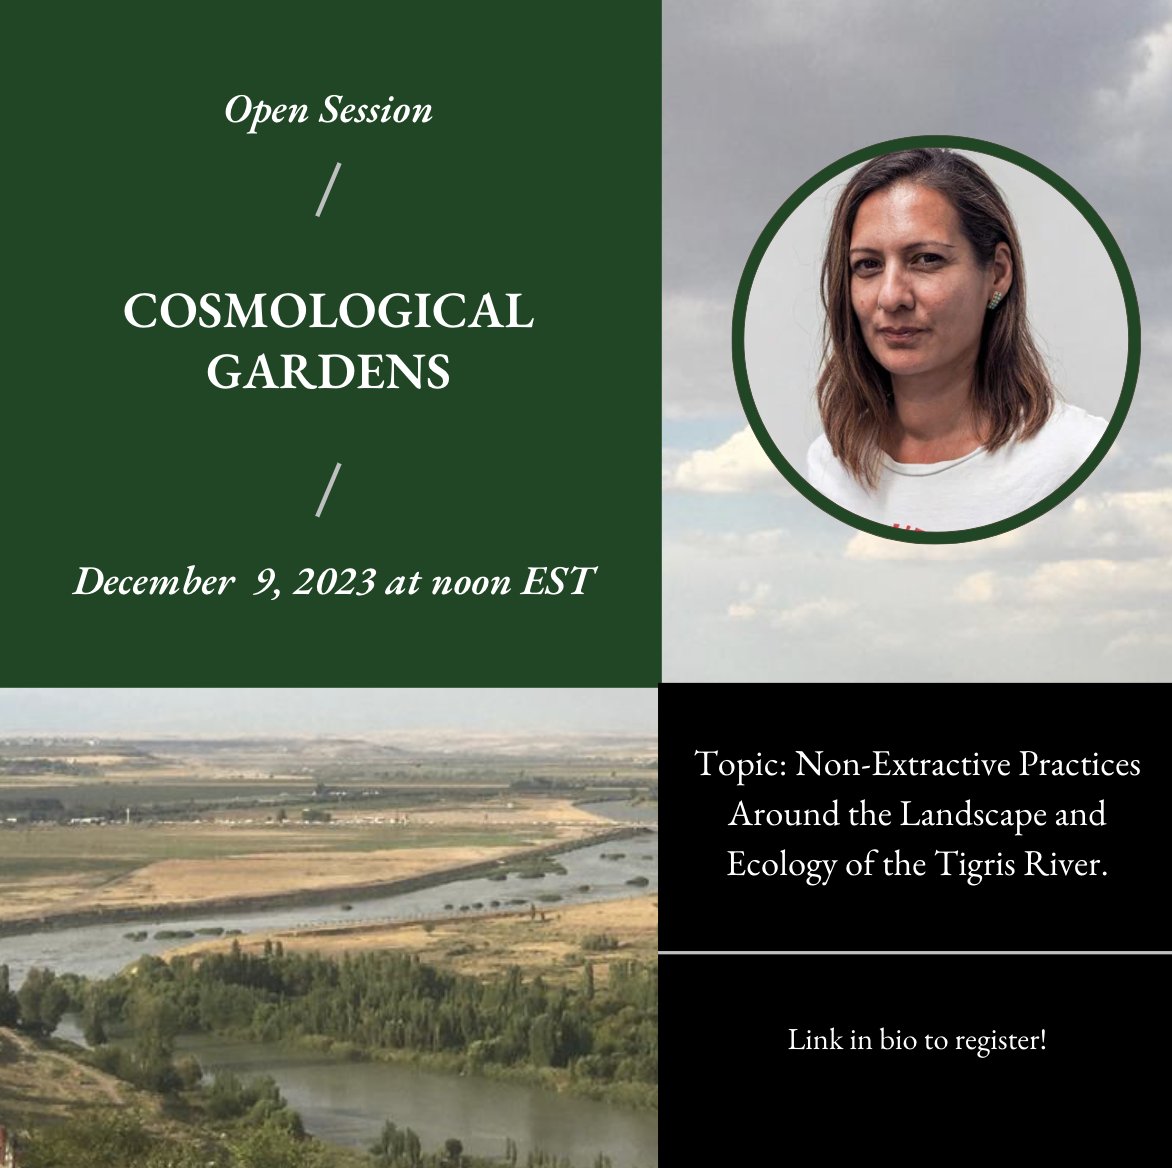 Join us for the next open session of the Cosmological Gardens Study Group! Led by Senior Research Fellow, Pelin Tan happening on Saturday, December 9 at 12 PM EST. Register here: loom.ly/JH5uNmw